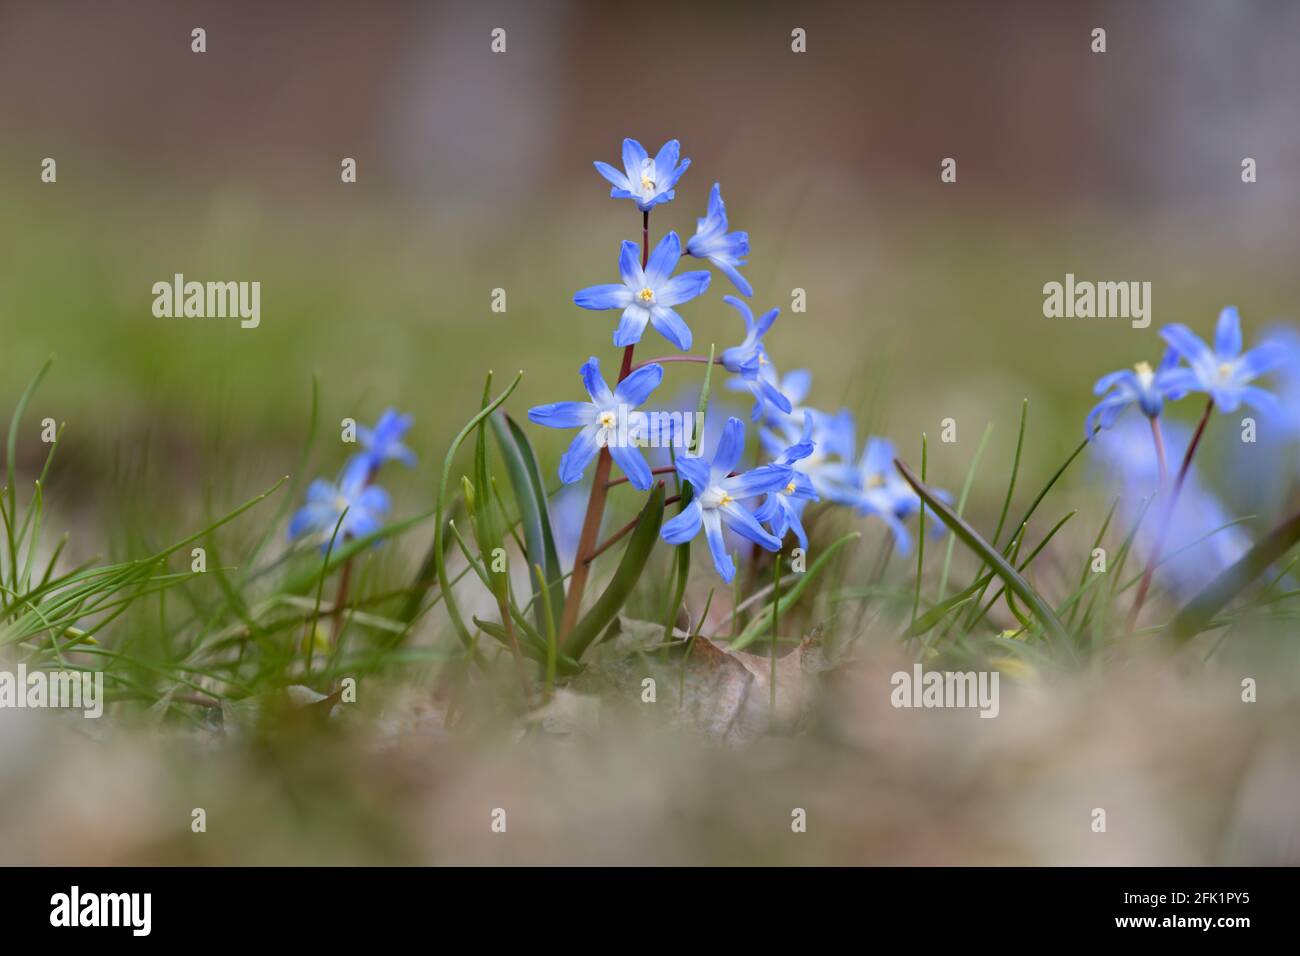 Scilla luciliae blooming in grass in early spring Stock Photo